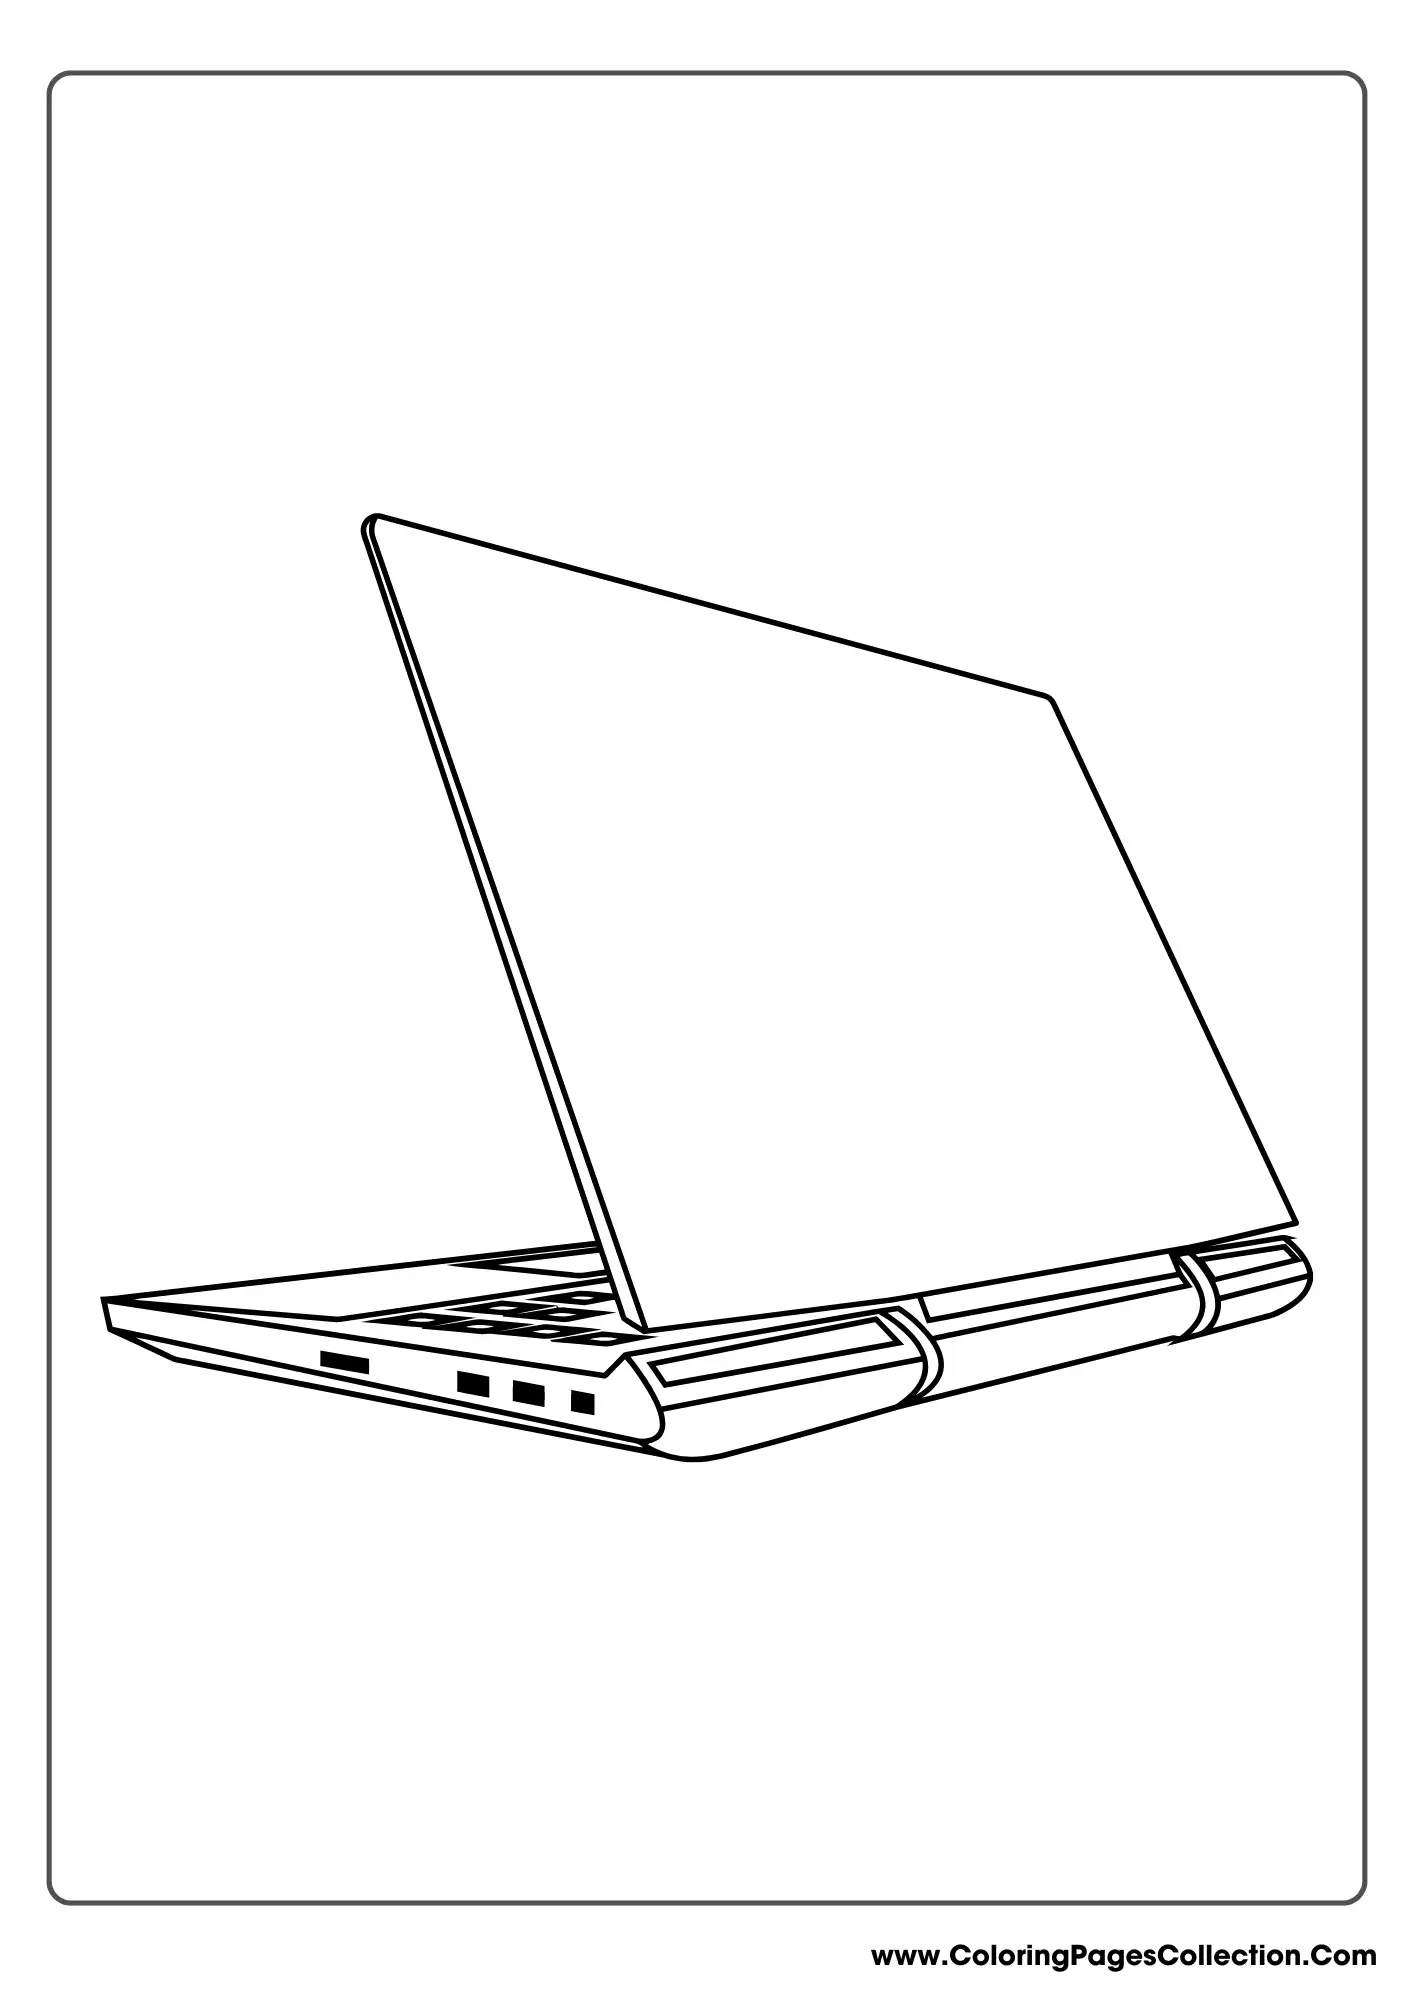 Detailed Laptop Coloring Page, Computer coloring pages